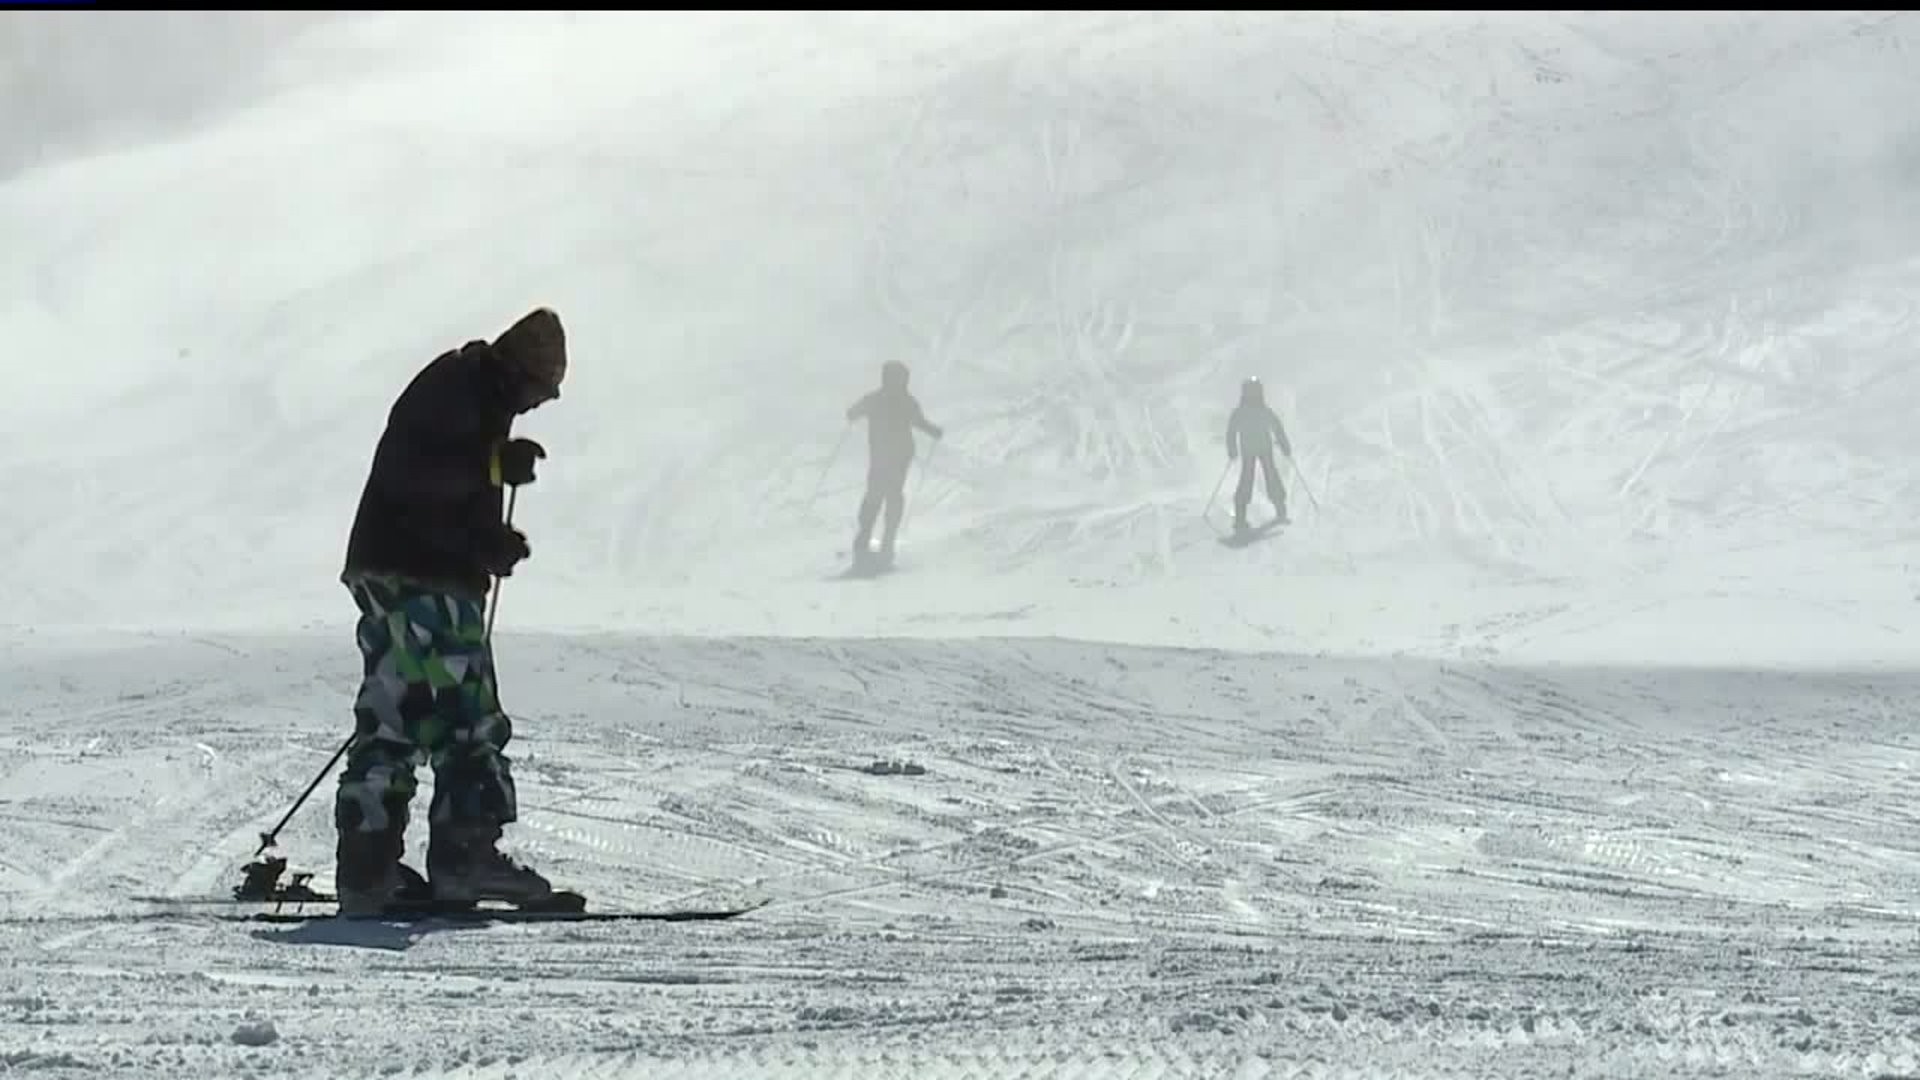 Cold not stopping skiers and snowboarders